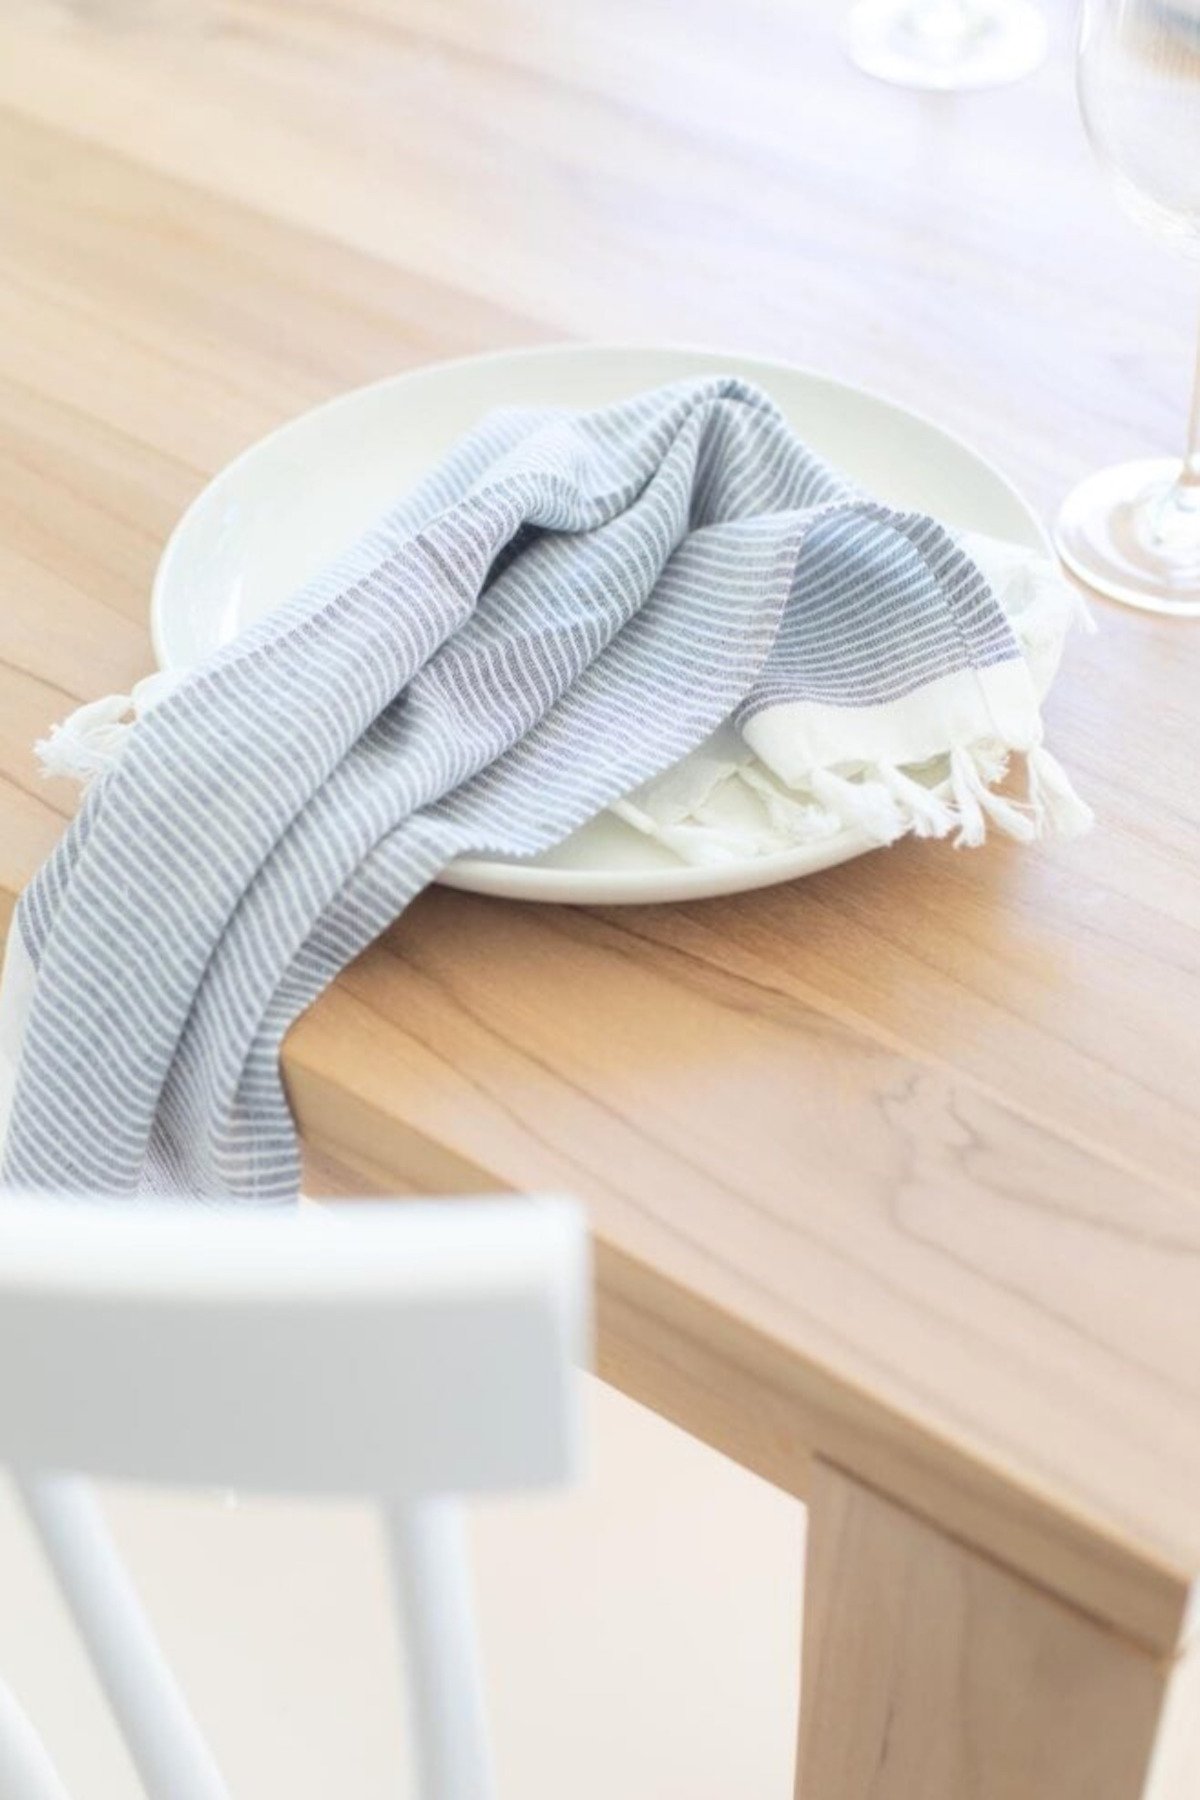 A blue striped napkin on a wooden teak table.